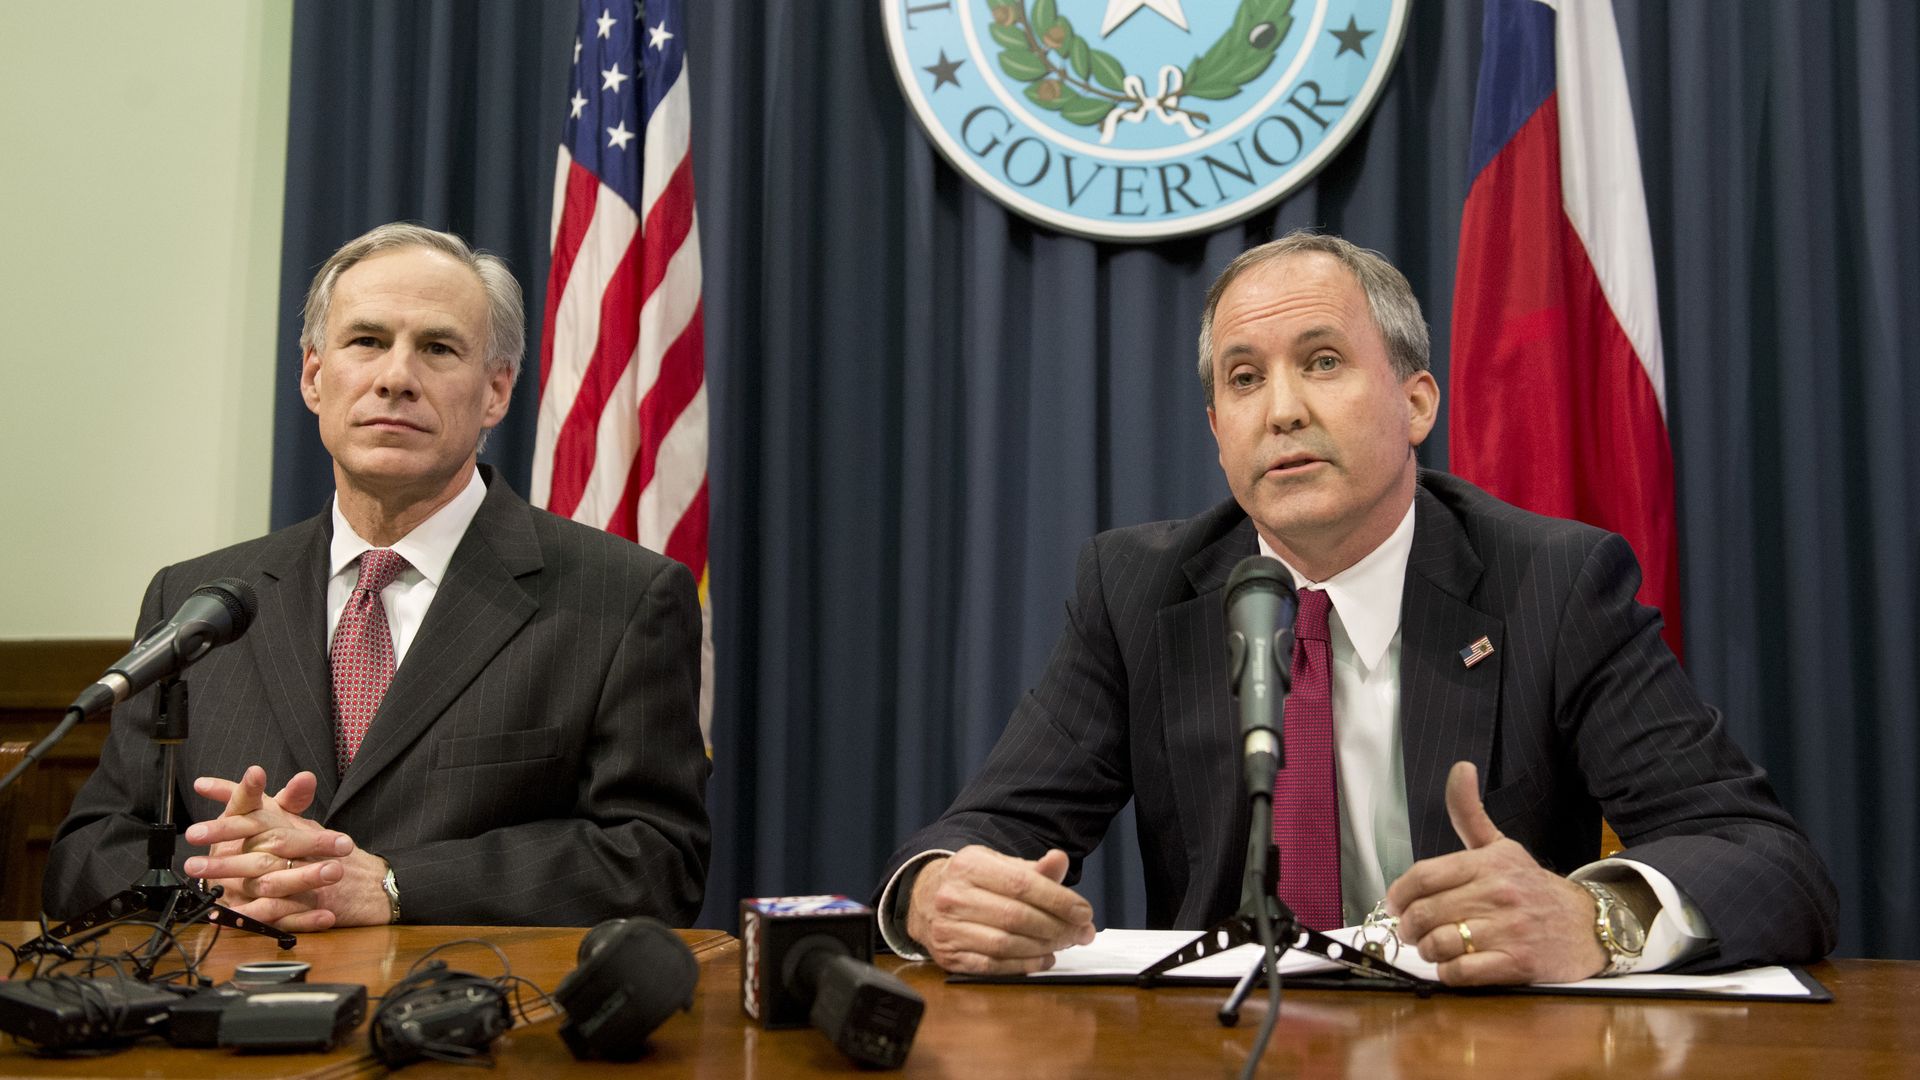  Texas Gov. Greg Abbott, l, and Attorney General Ken Paxton hold a press conference in 2015